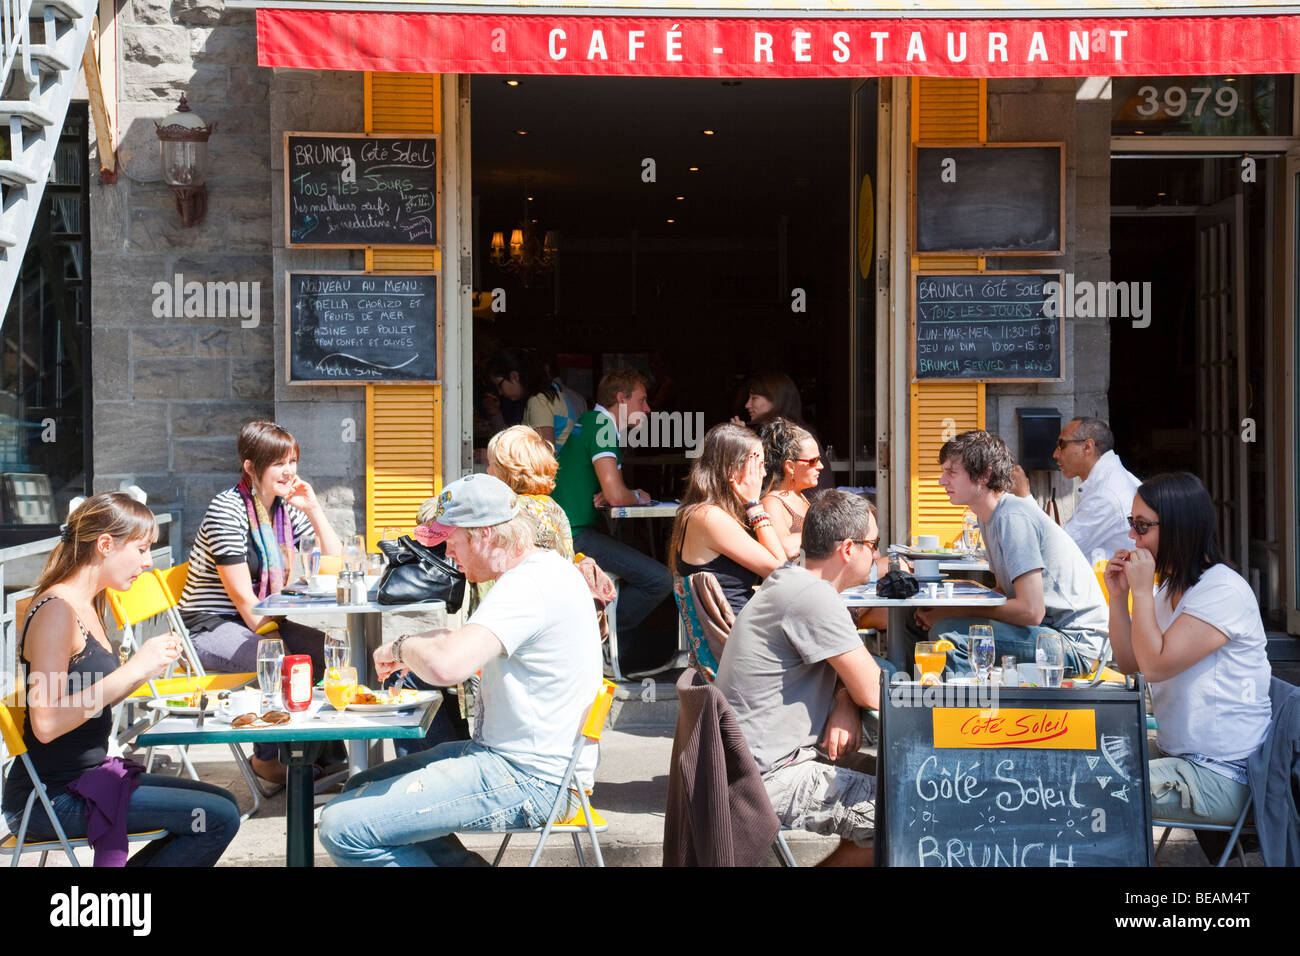 Cafe on Rue St Dennis in Montreal Canada Stock Photo